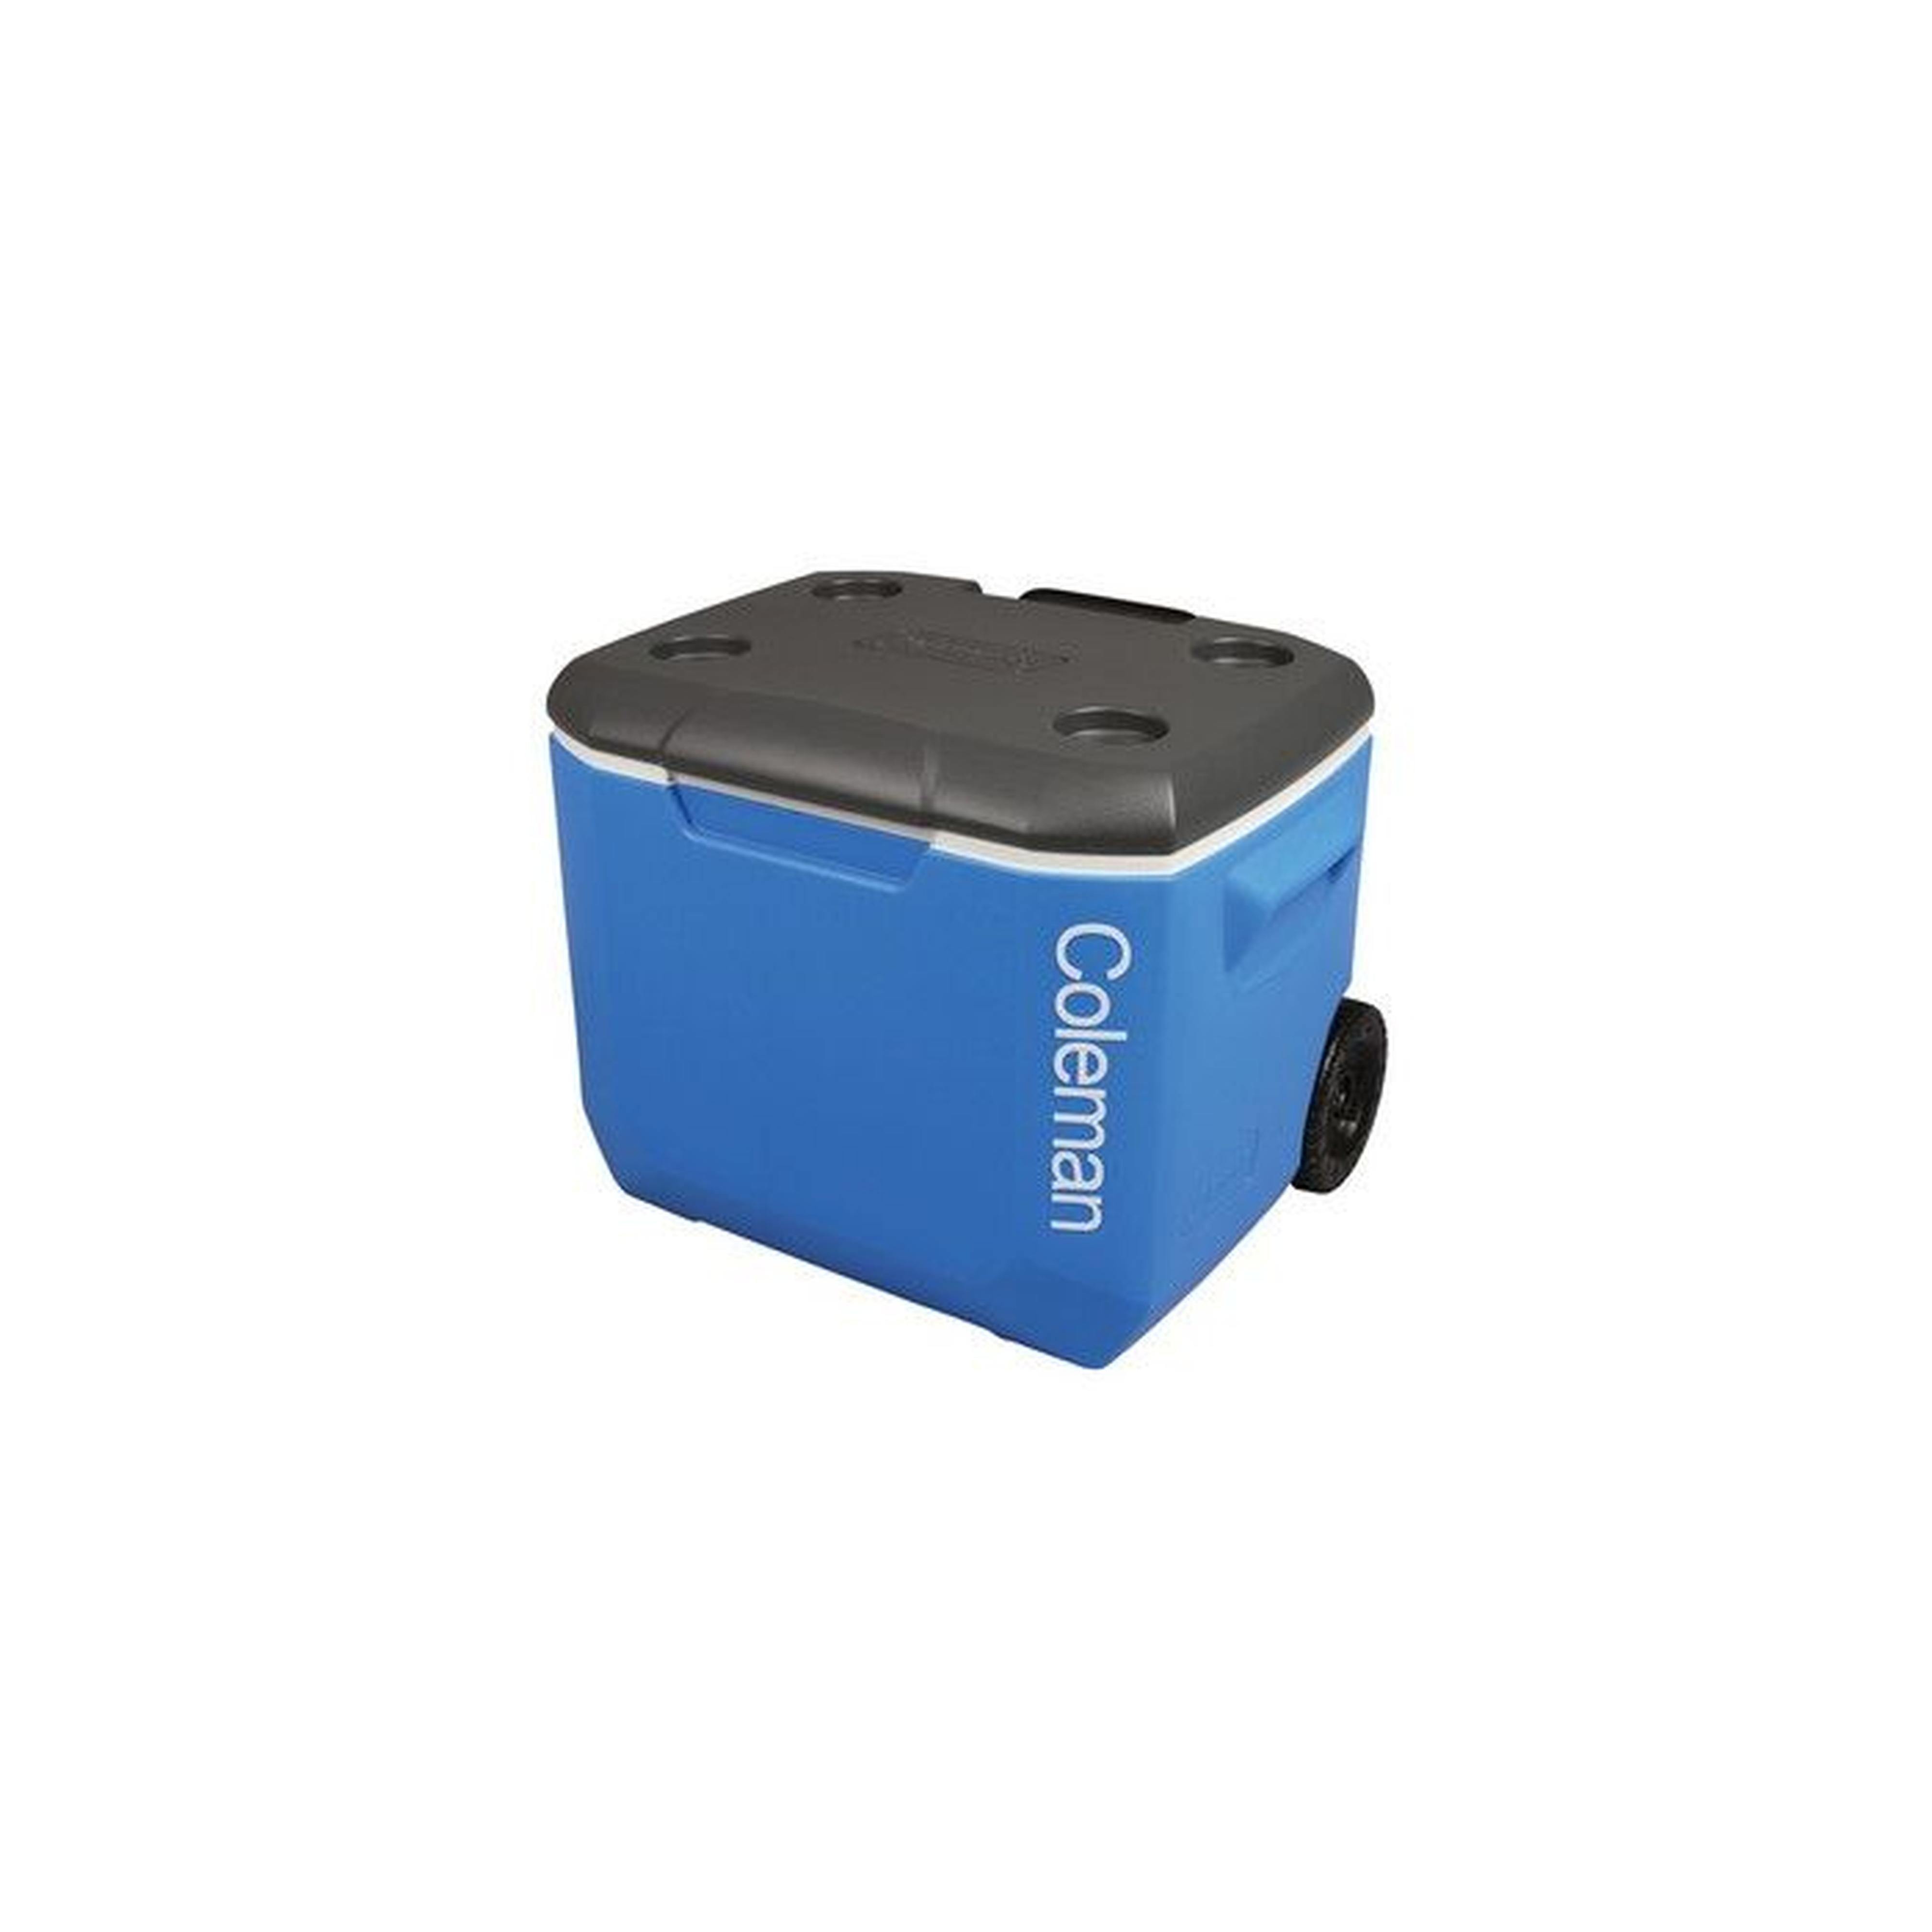 https://cdn.shopify.com/s/files/1/0496/6842/3839/products/coleman_performance_wheeled_cooler.jpg?v=1619171683&width=4000